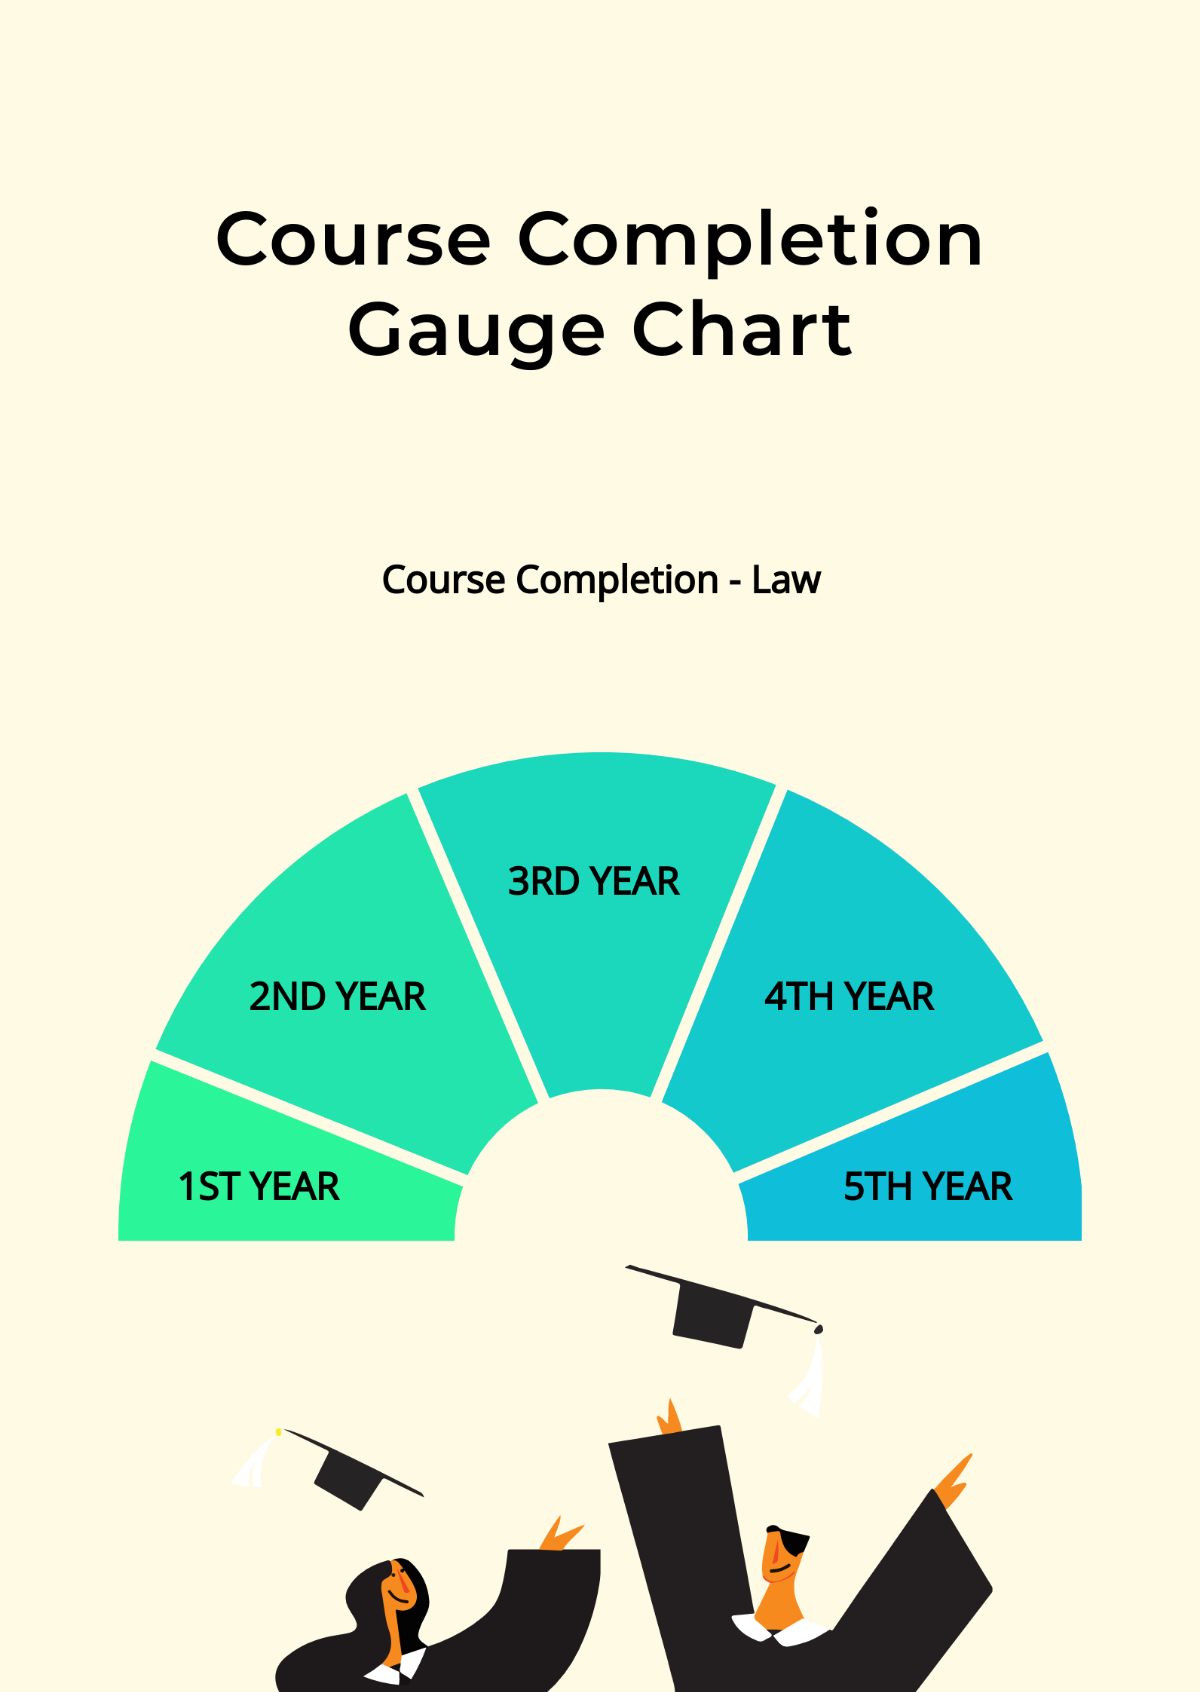 Course Completion Gauge Chart